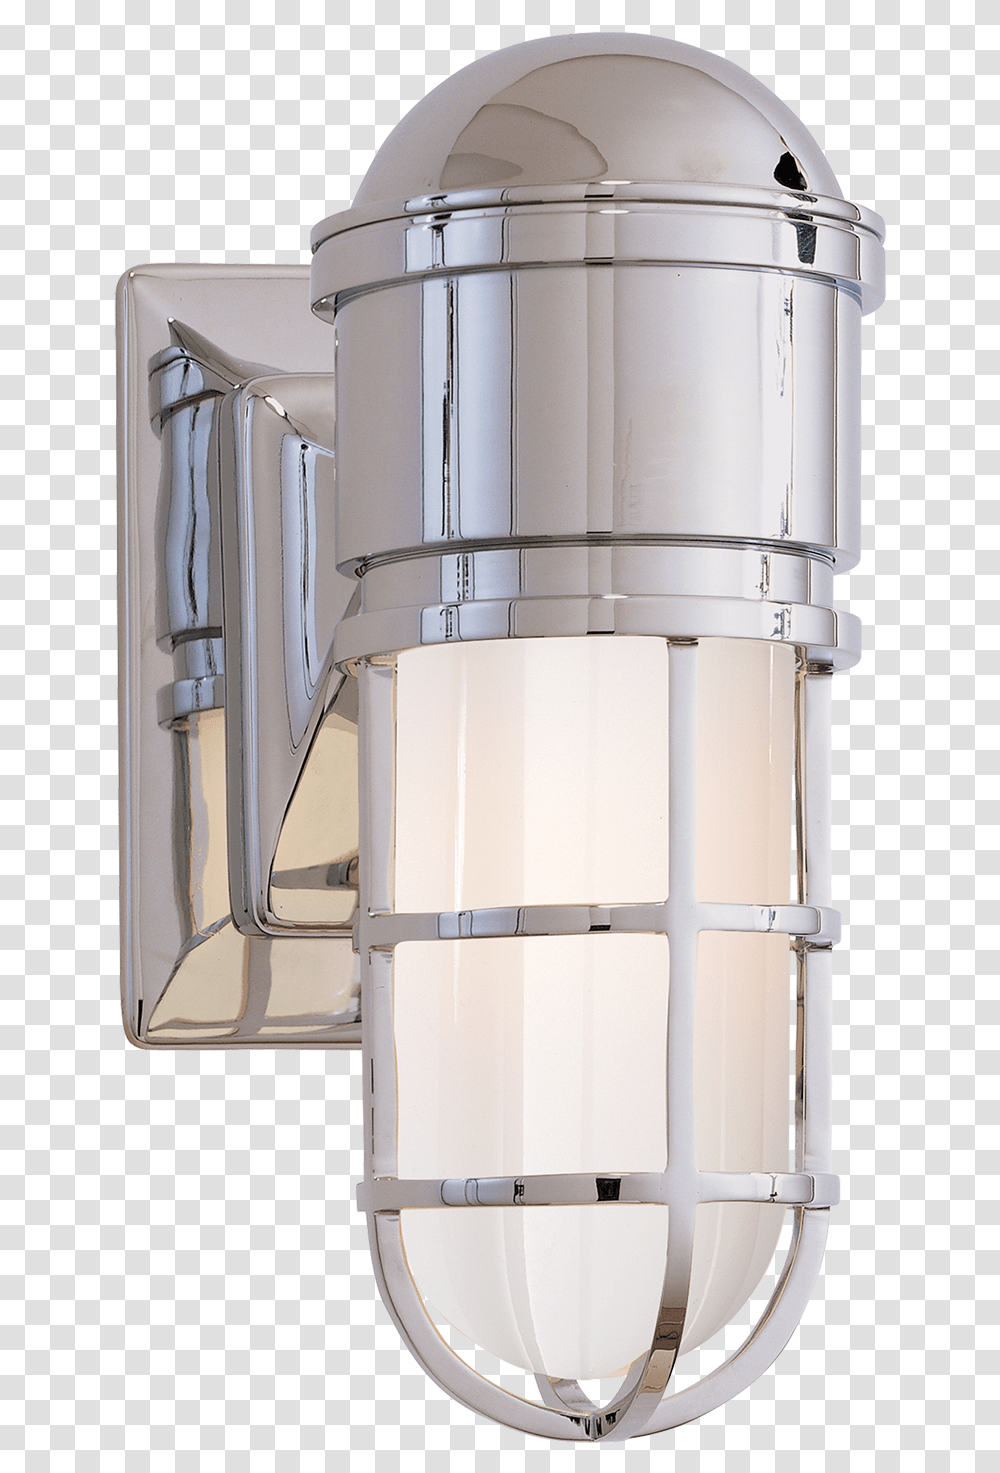 Marine Wall Sconce, Lamp, Mixer, Appliance, Lampshade Transparent Png